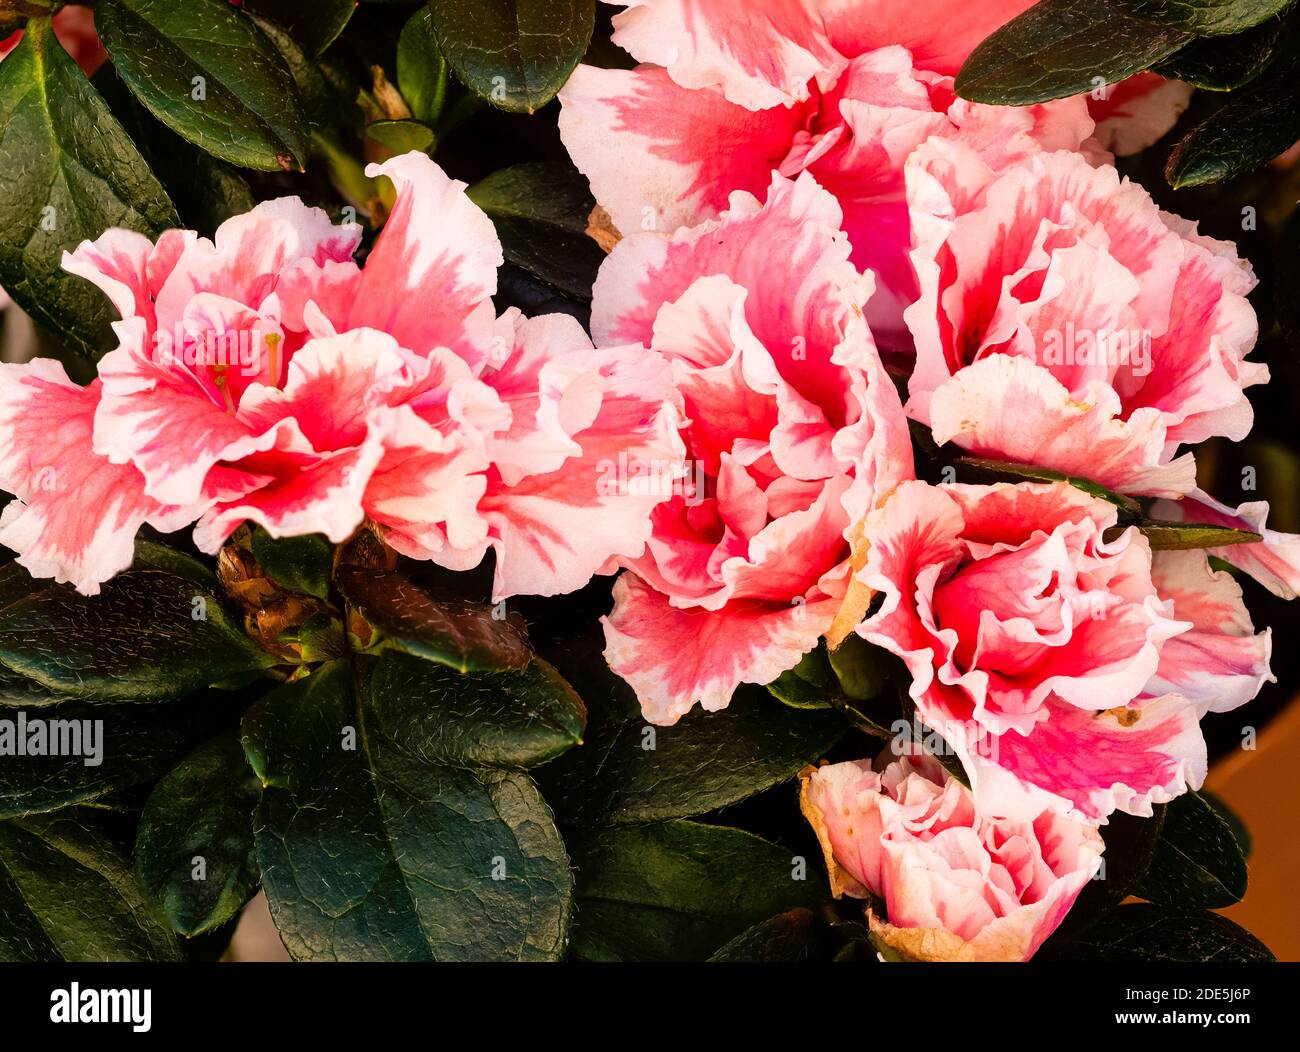 Ruffled coral pink and white double flowers of the tender winter flowering evergreen house and greenhouse plant, Rhododendron simsii 'Inga' Stock Photo